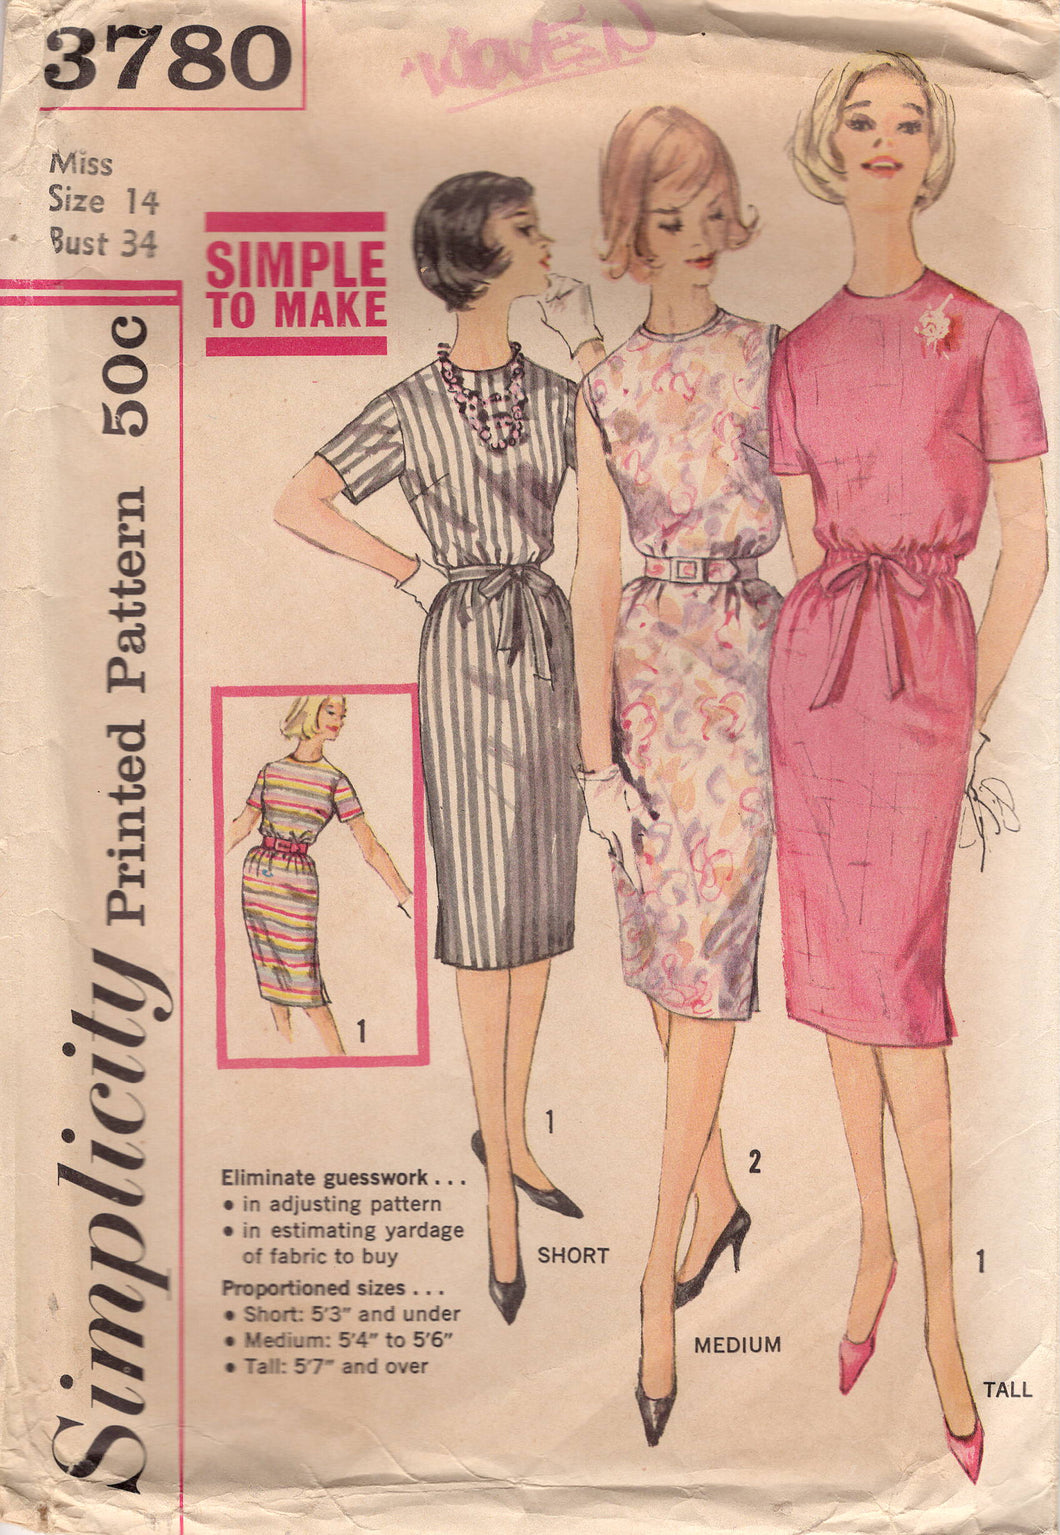 1960's Simplicity One-Piece Sheath Dress Pattern with Proportioned fit - Bust 34